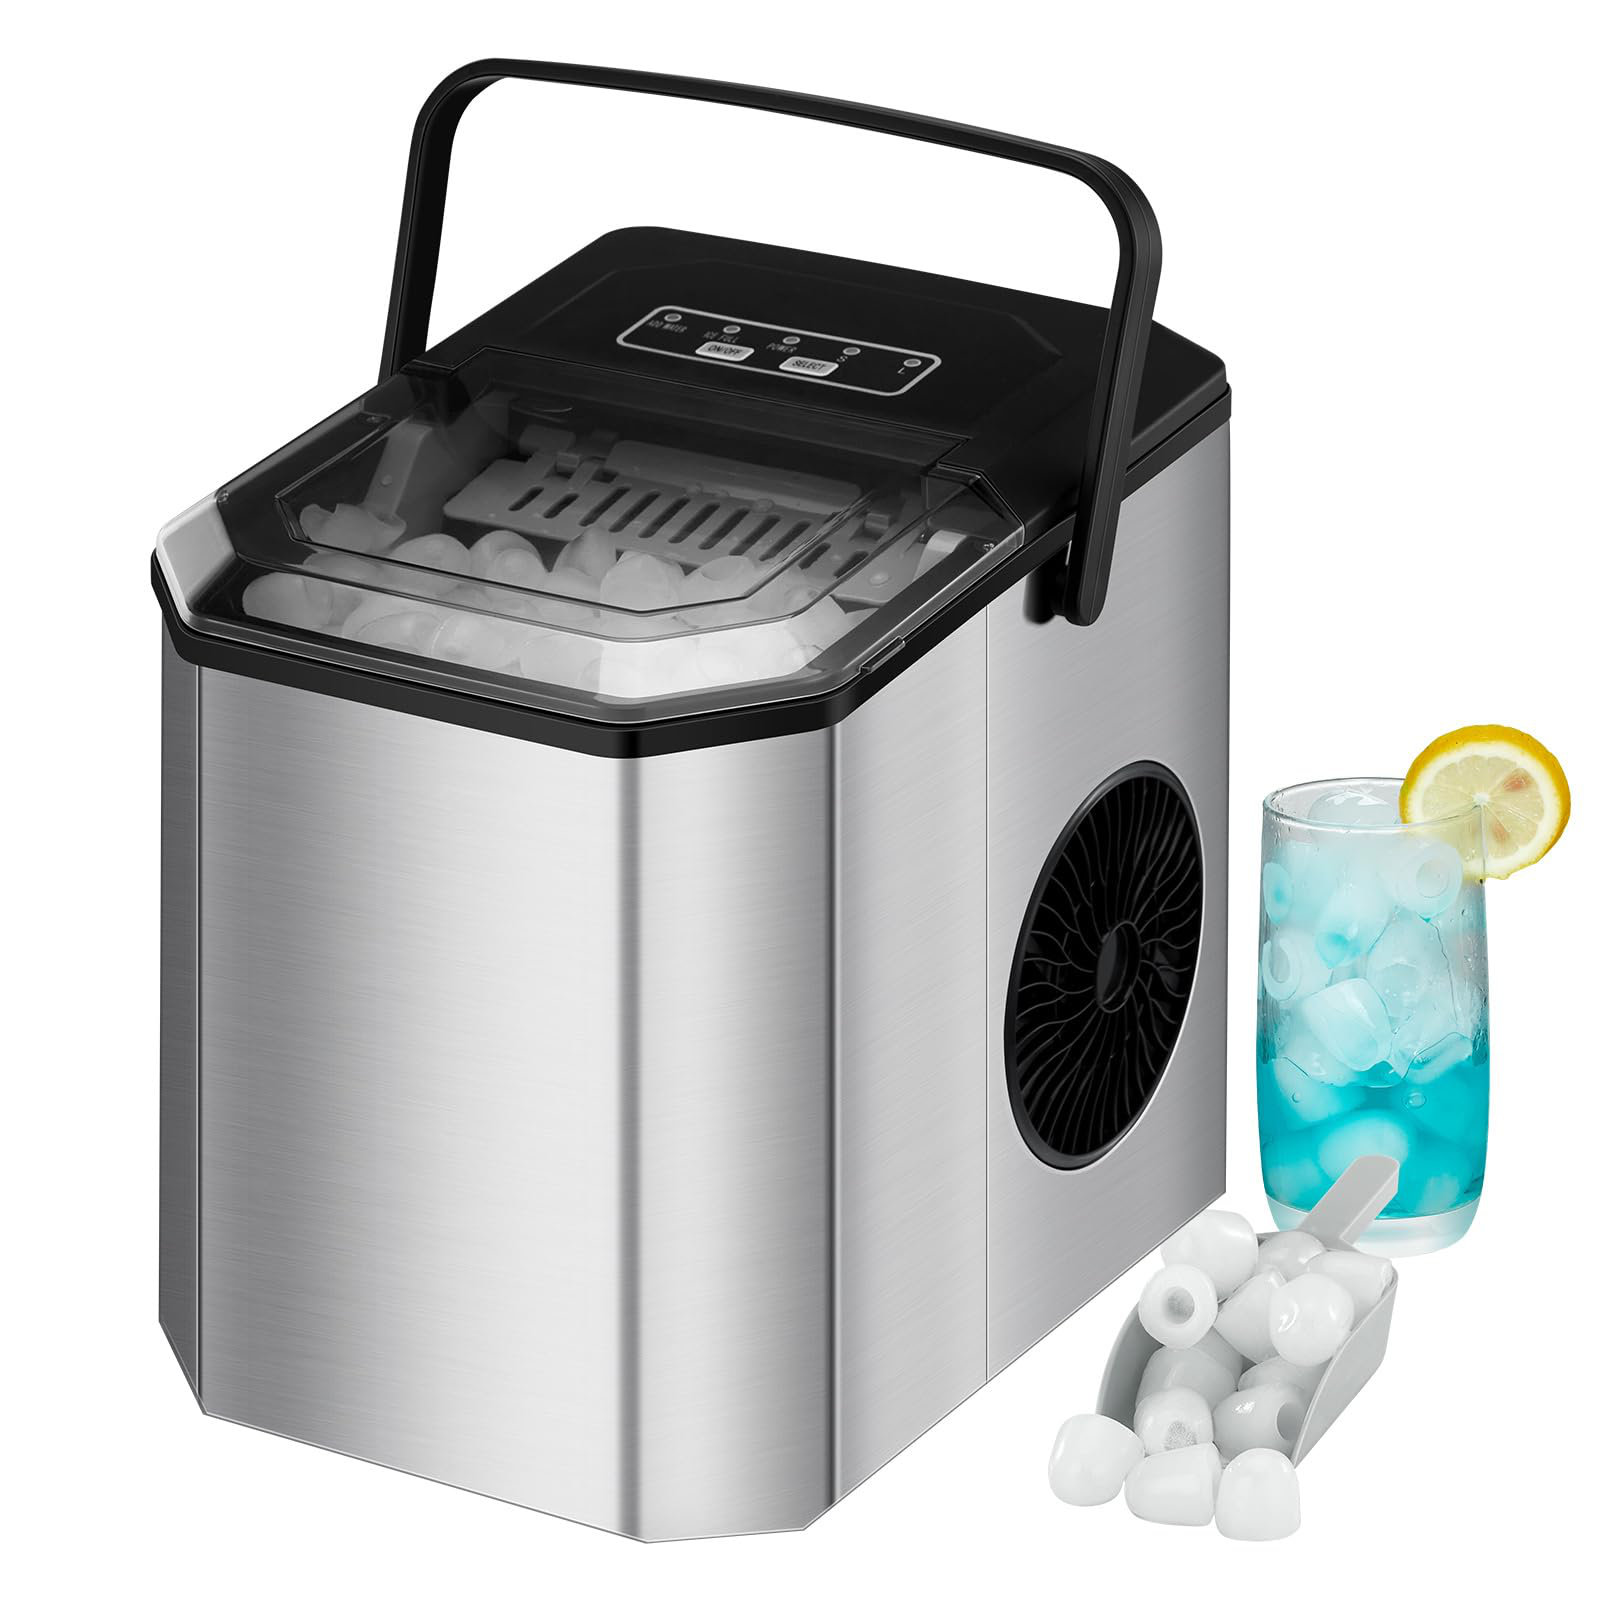  Igloo Premium Self-Cleaning Countertop Ice Maker Machine,  Handled Portable Ice Maker, Produces 26 lbs. in 24 hrs. with Ice Cubes  Ready in 6-8 minutes, Comes with Ice Scoop and Basket : Appliances